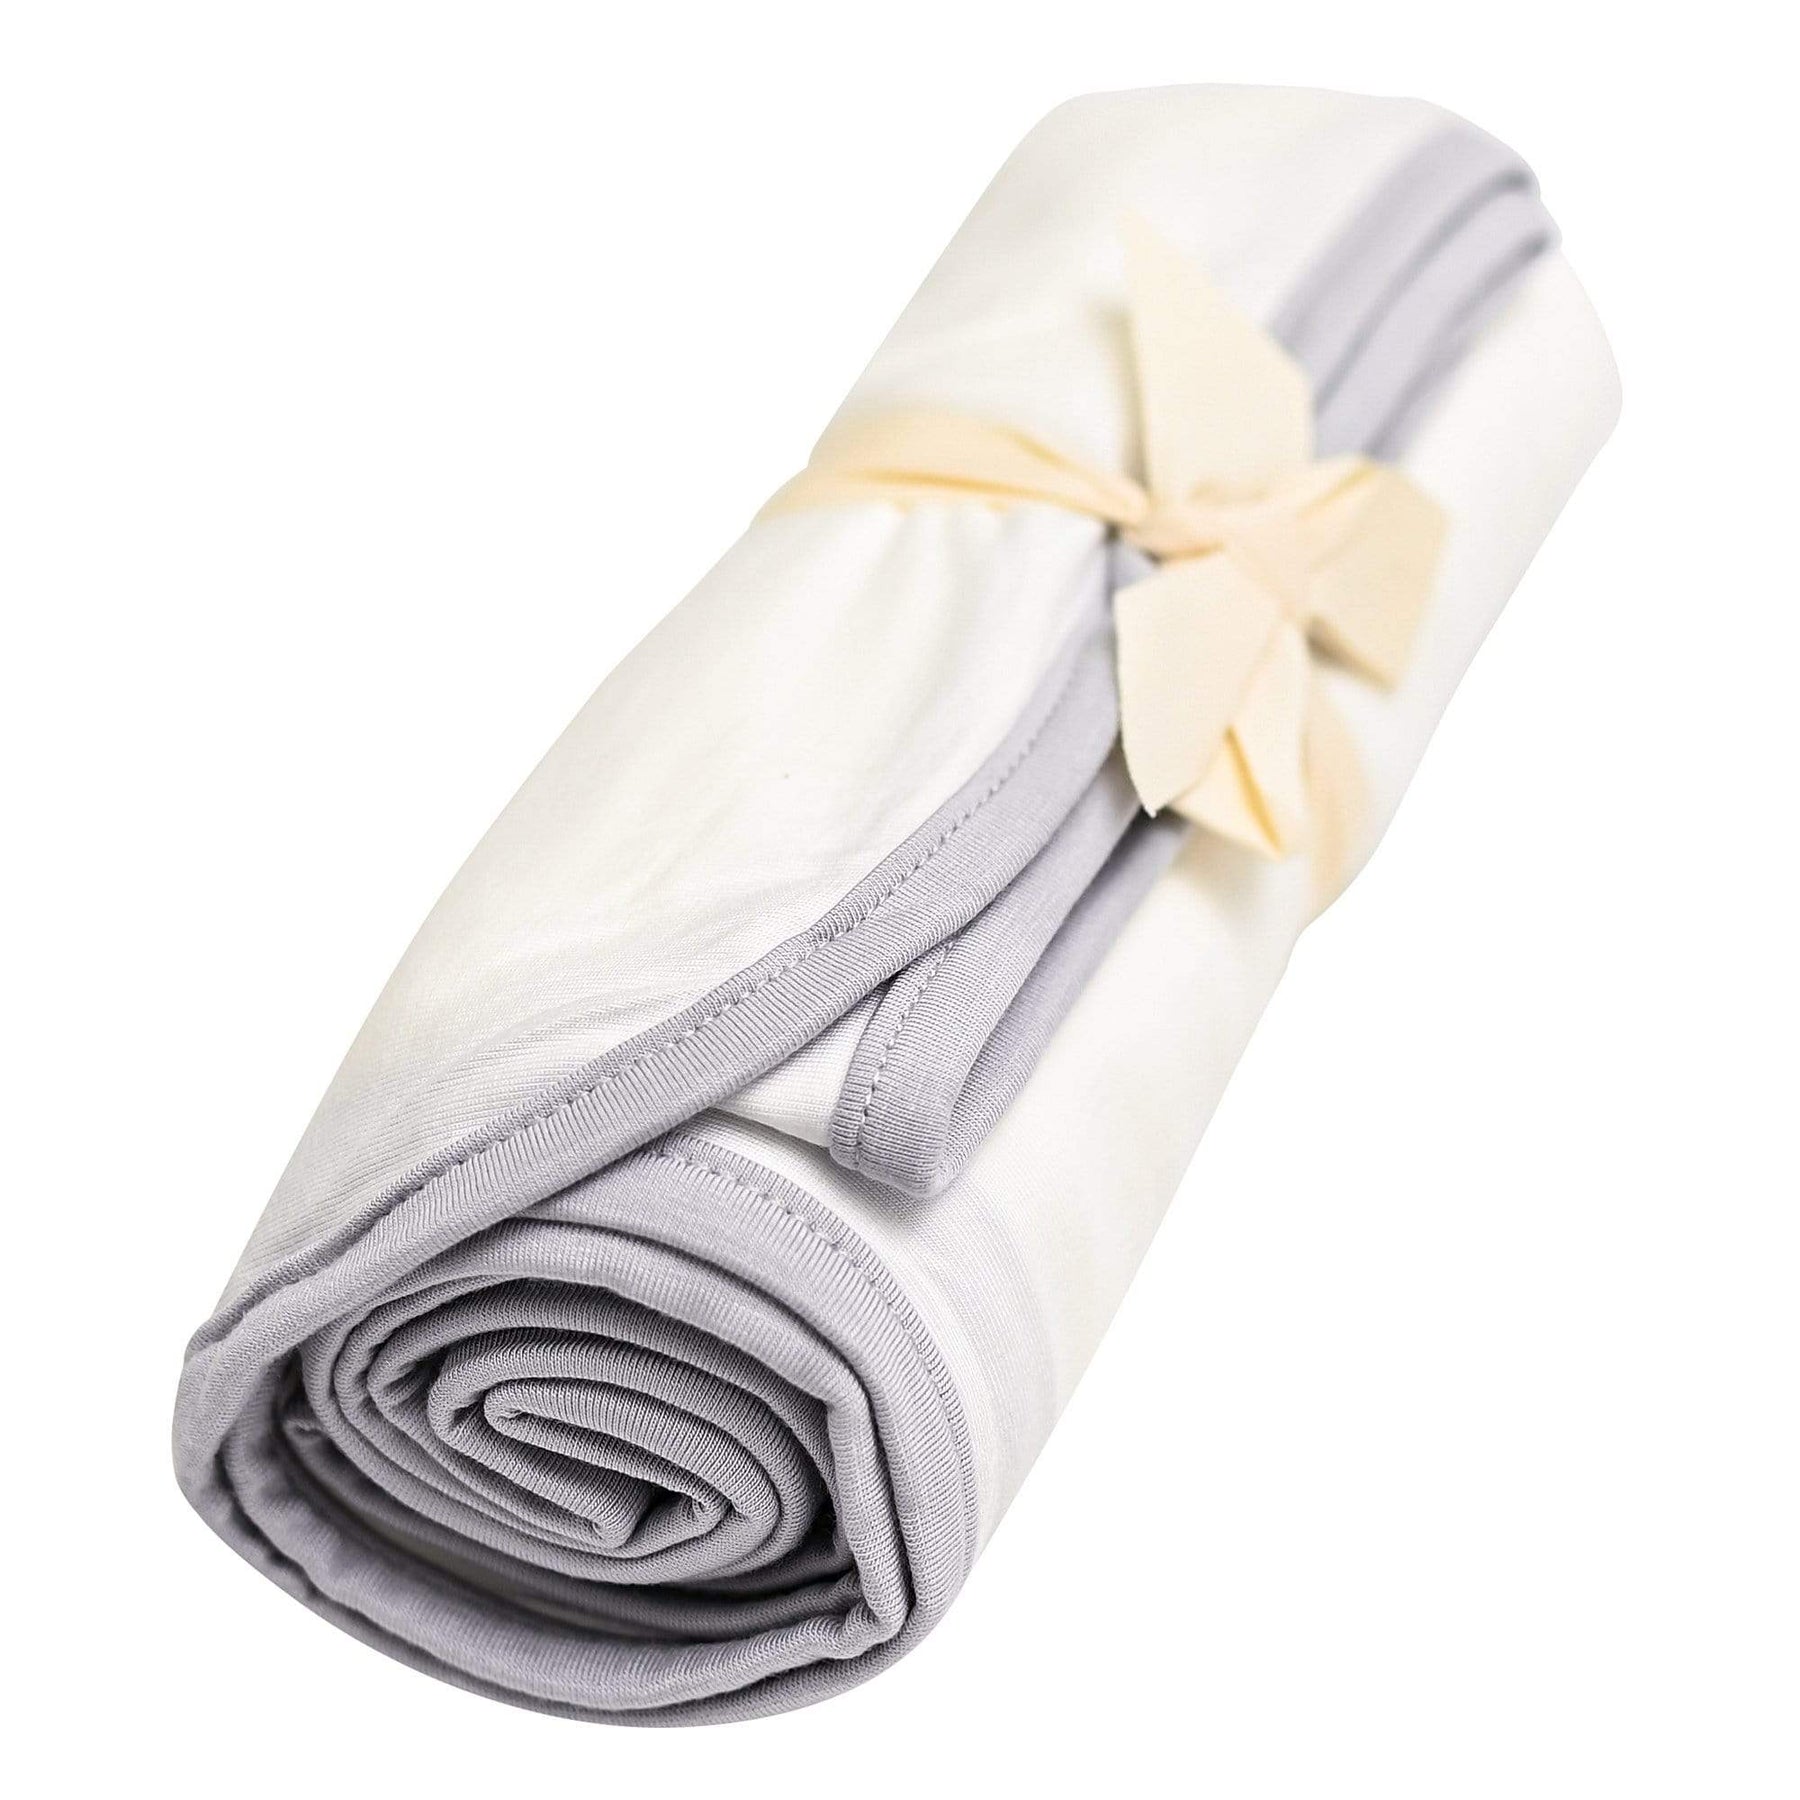 Kyte BABY Swaddling Blanket Cloud with Storm Trim / Infant Swaddle Blanket in Cloud with Storm Trim